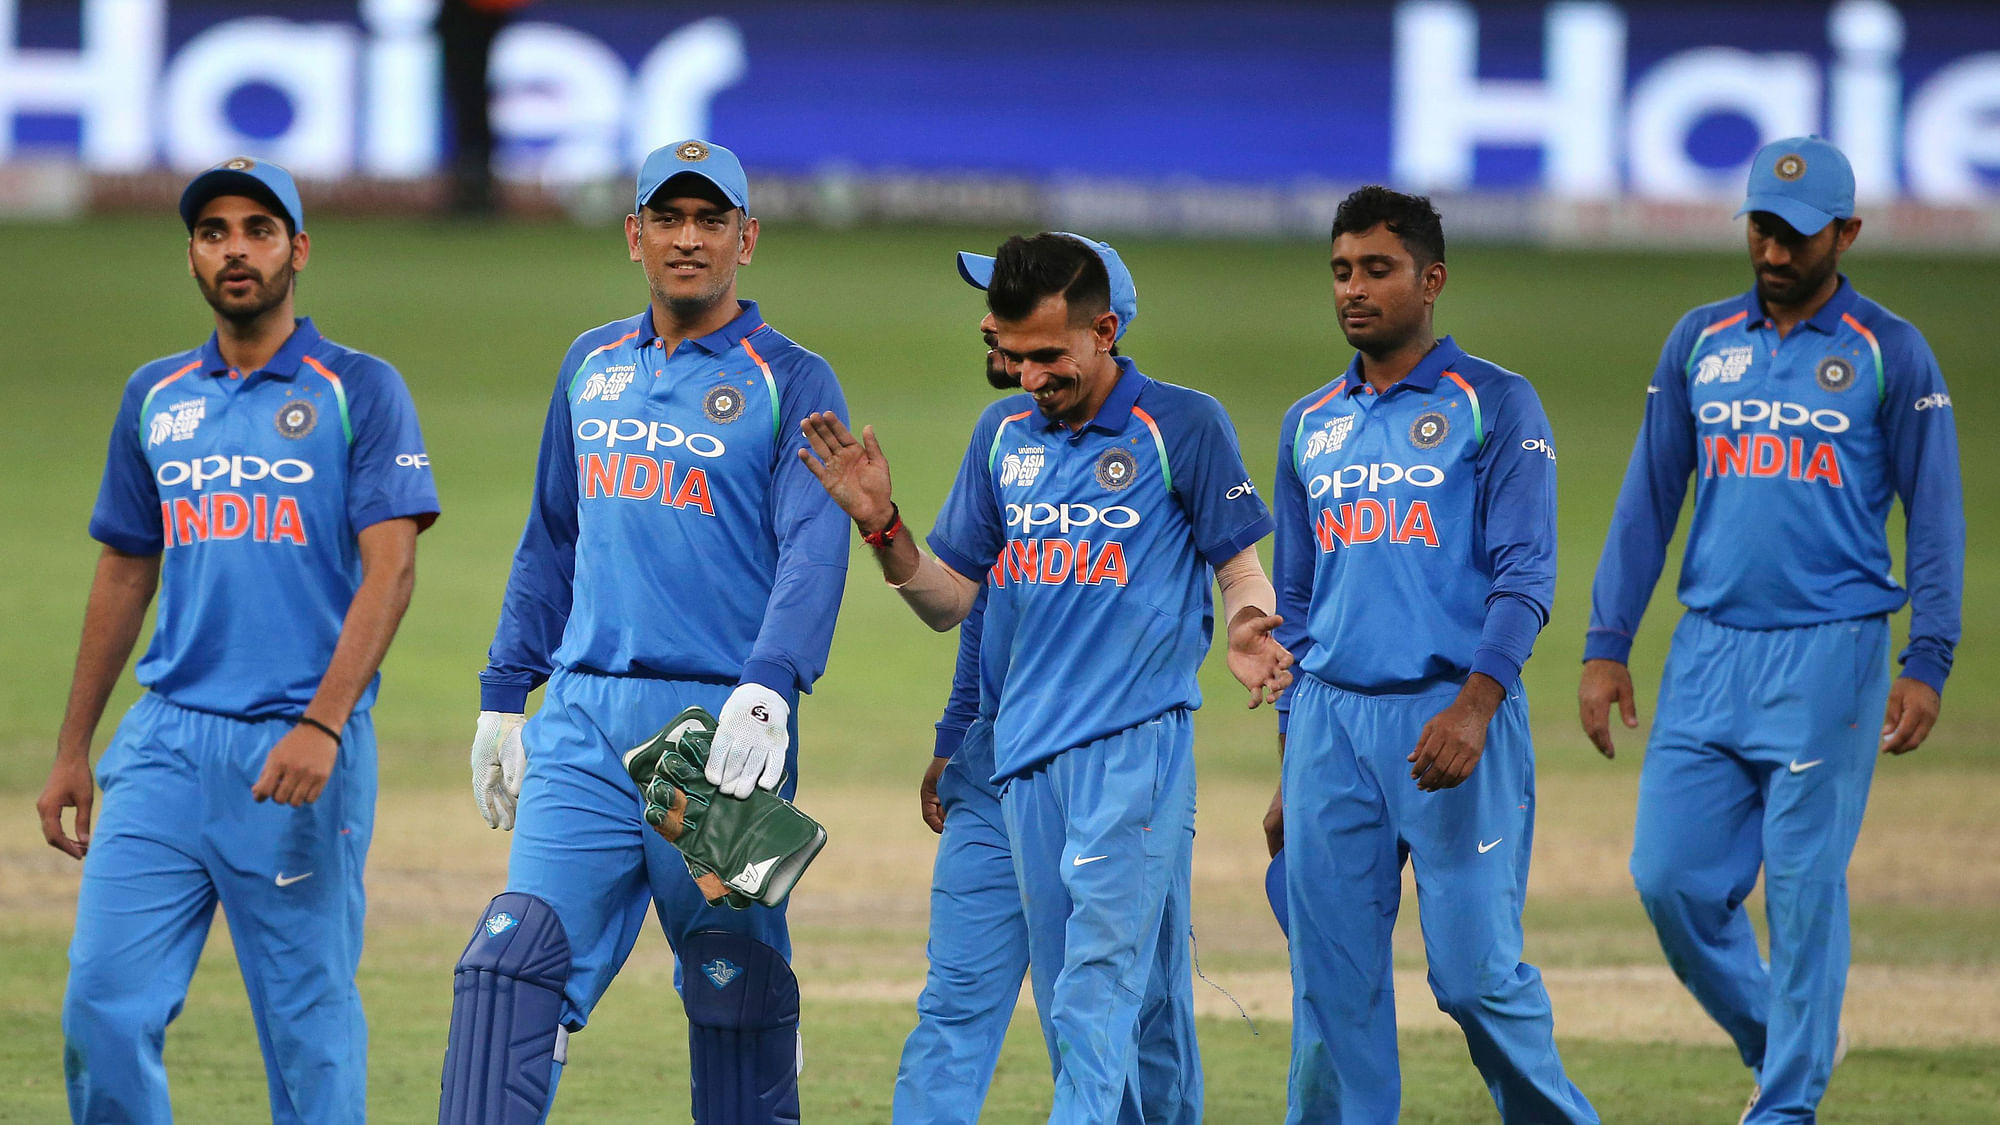 India play Afghanistan in their final Super Four match in Dubai on Tuesday, 25 September.